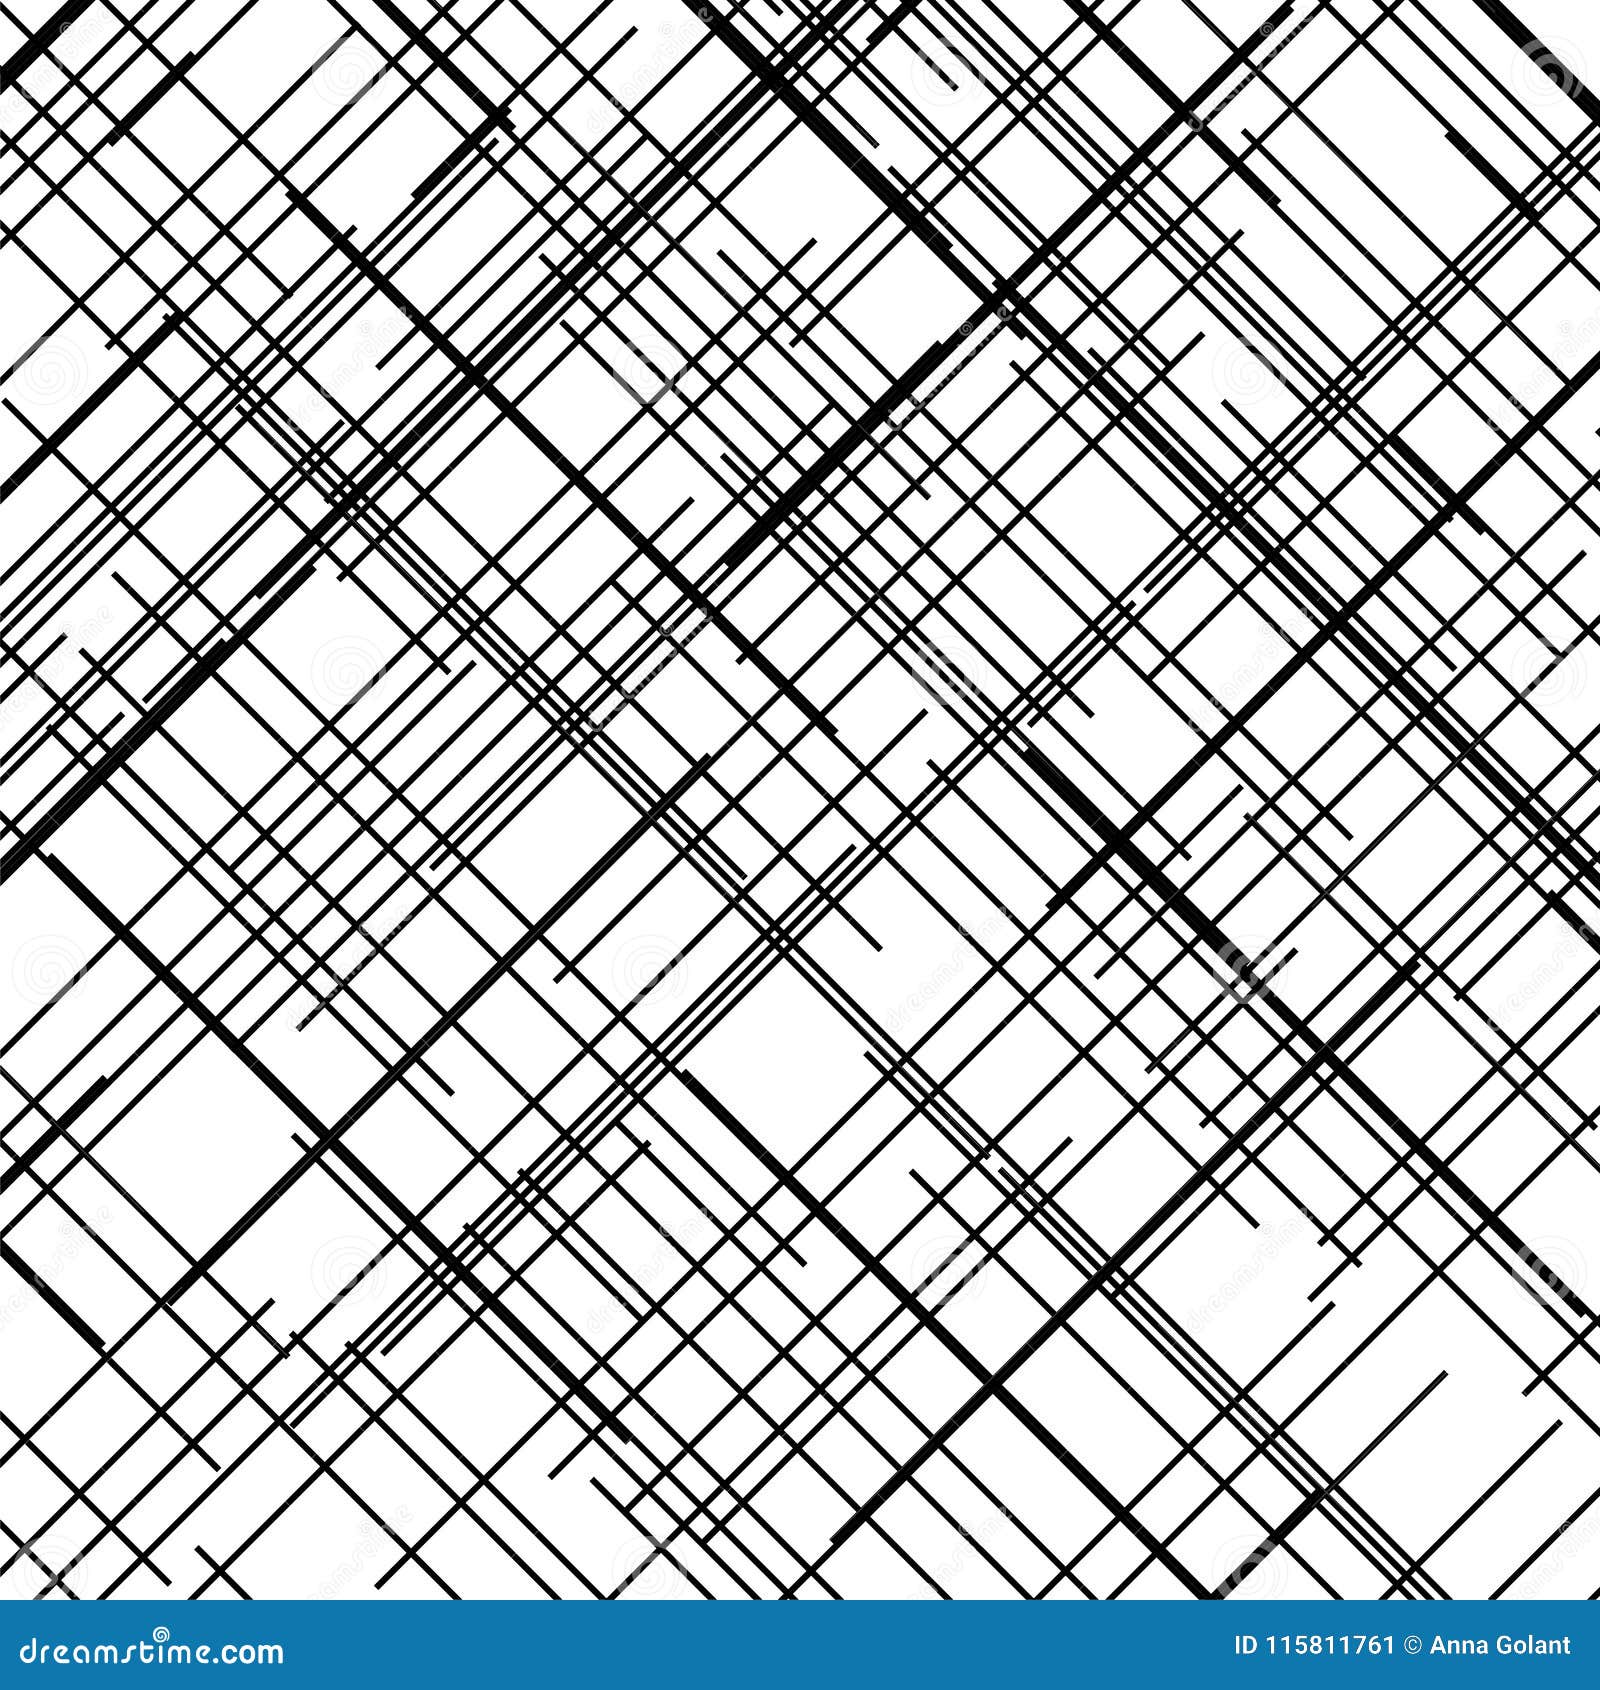 Criss Cross Pattern. Texture with Intersecting Straight Lines. Digital ...